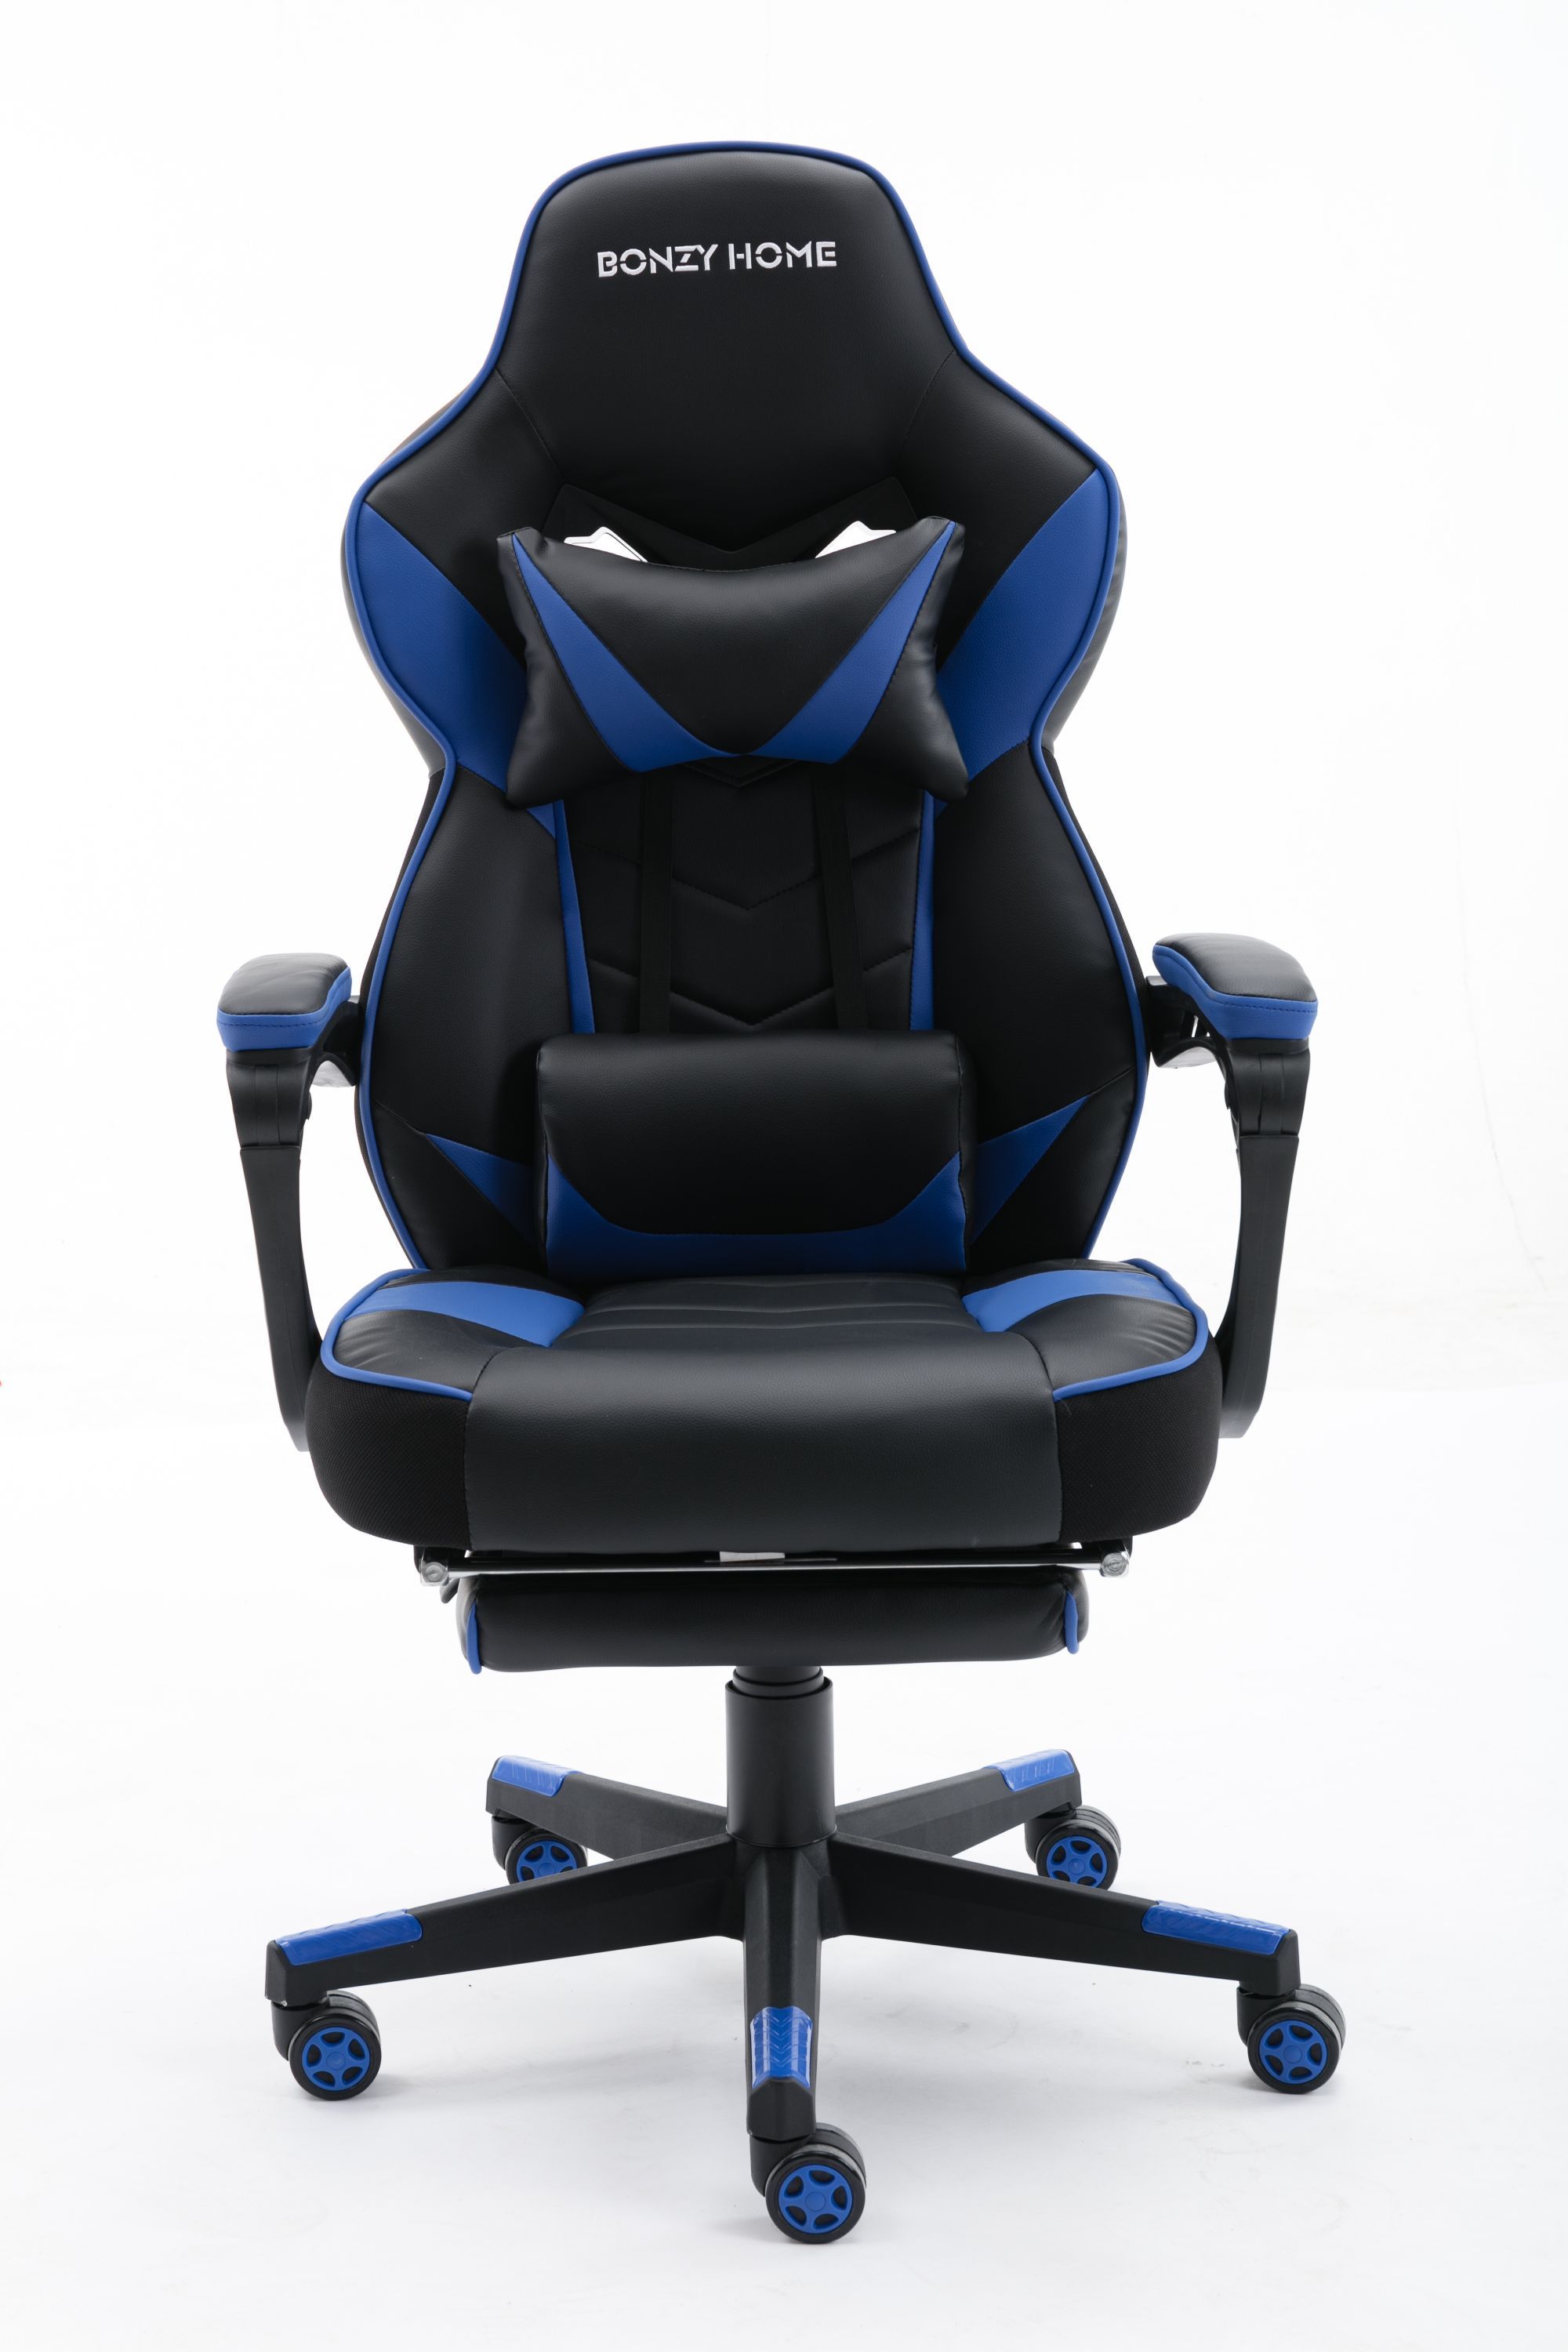 Details about   Gaming Chair Racing Ergonomic Recliner Office Computer Desk Seat Swivel Chair 